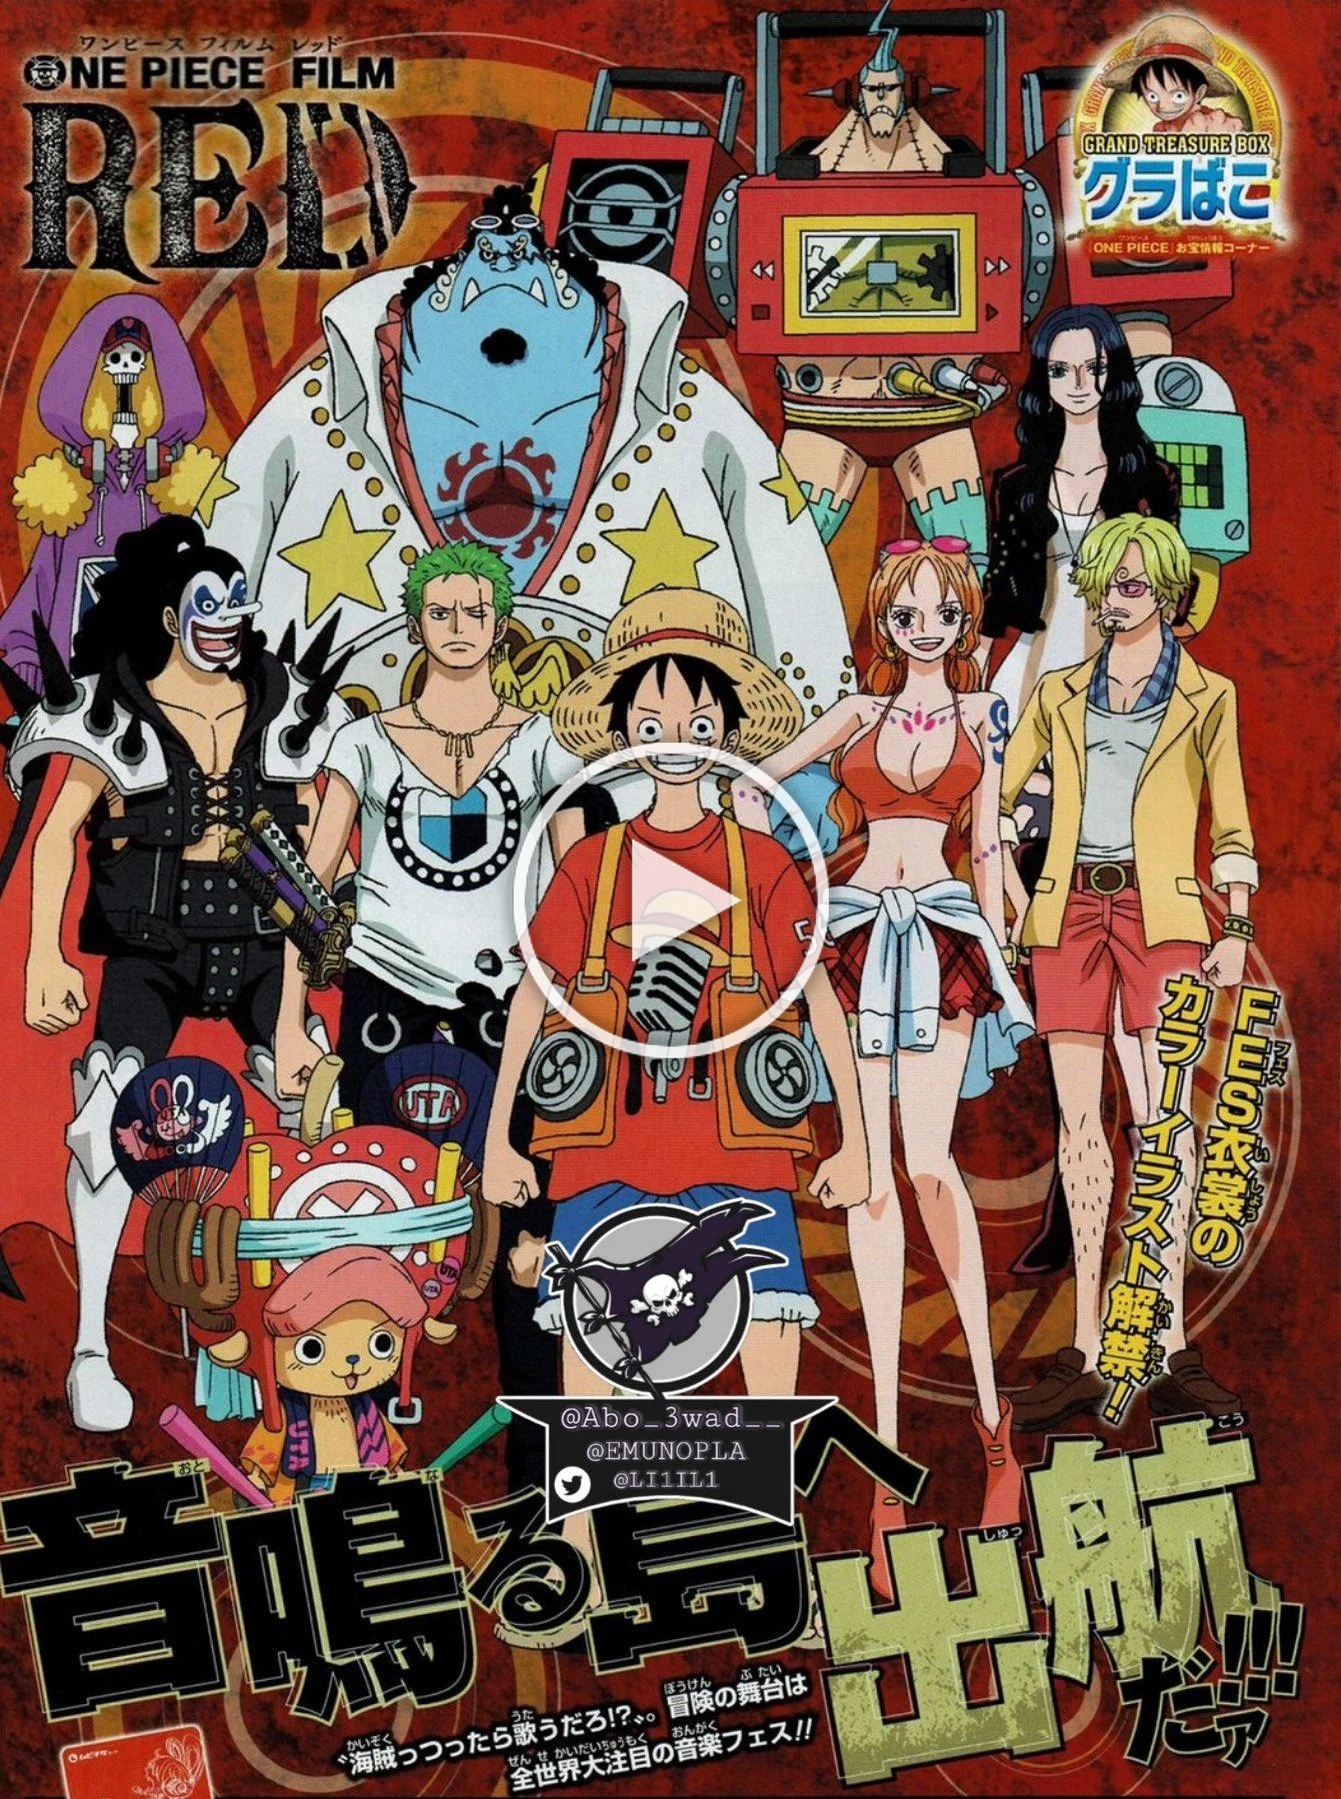 New poster of Red Shows Off Next Villain, One Piece.